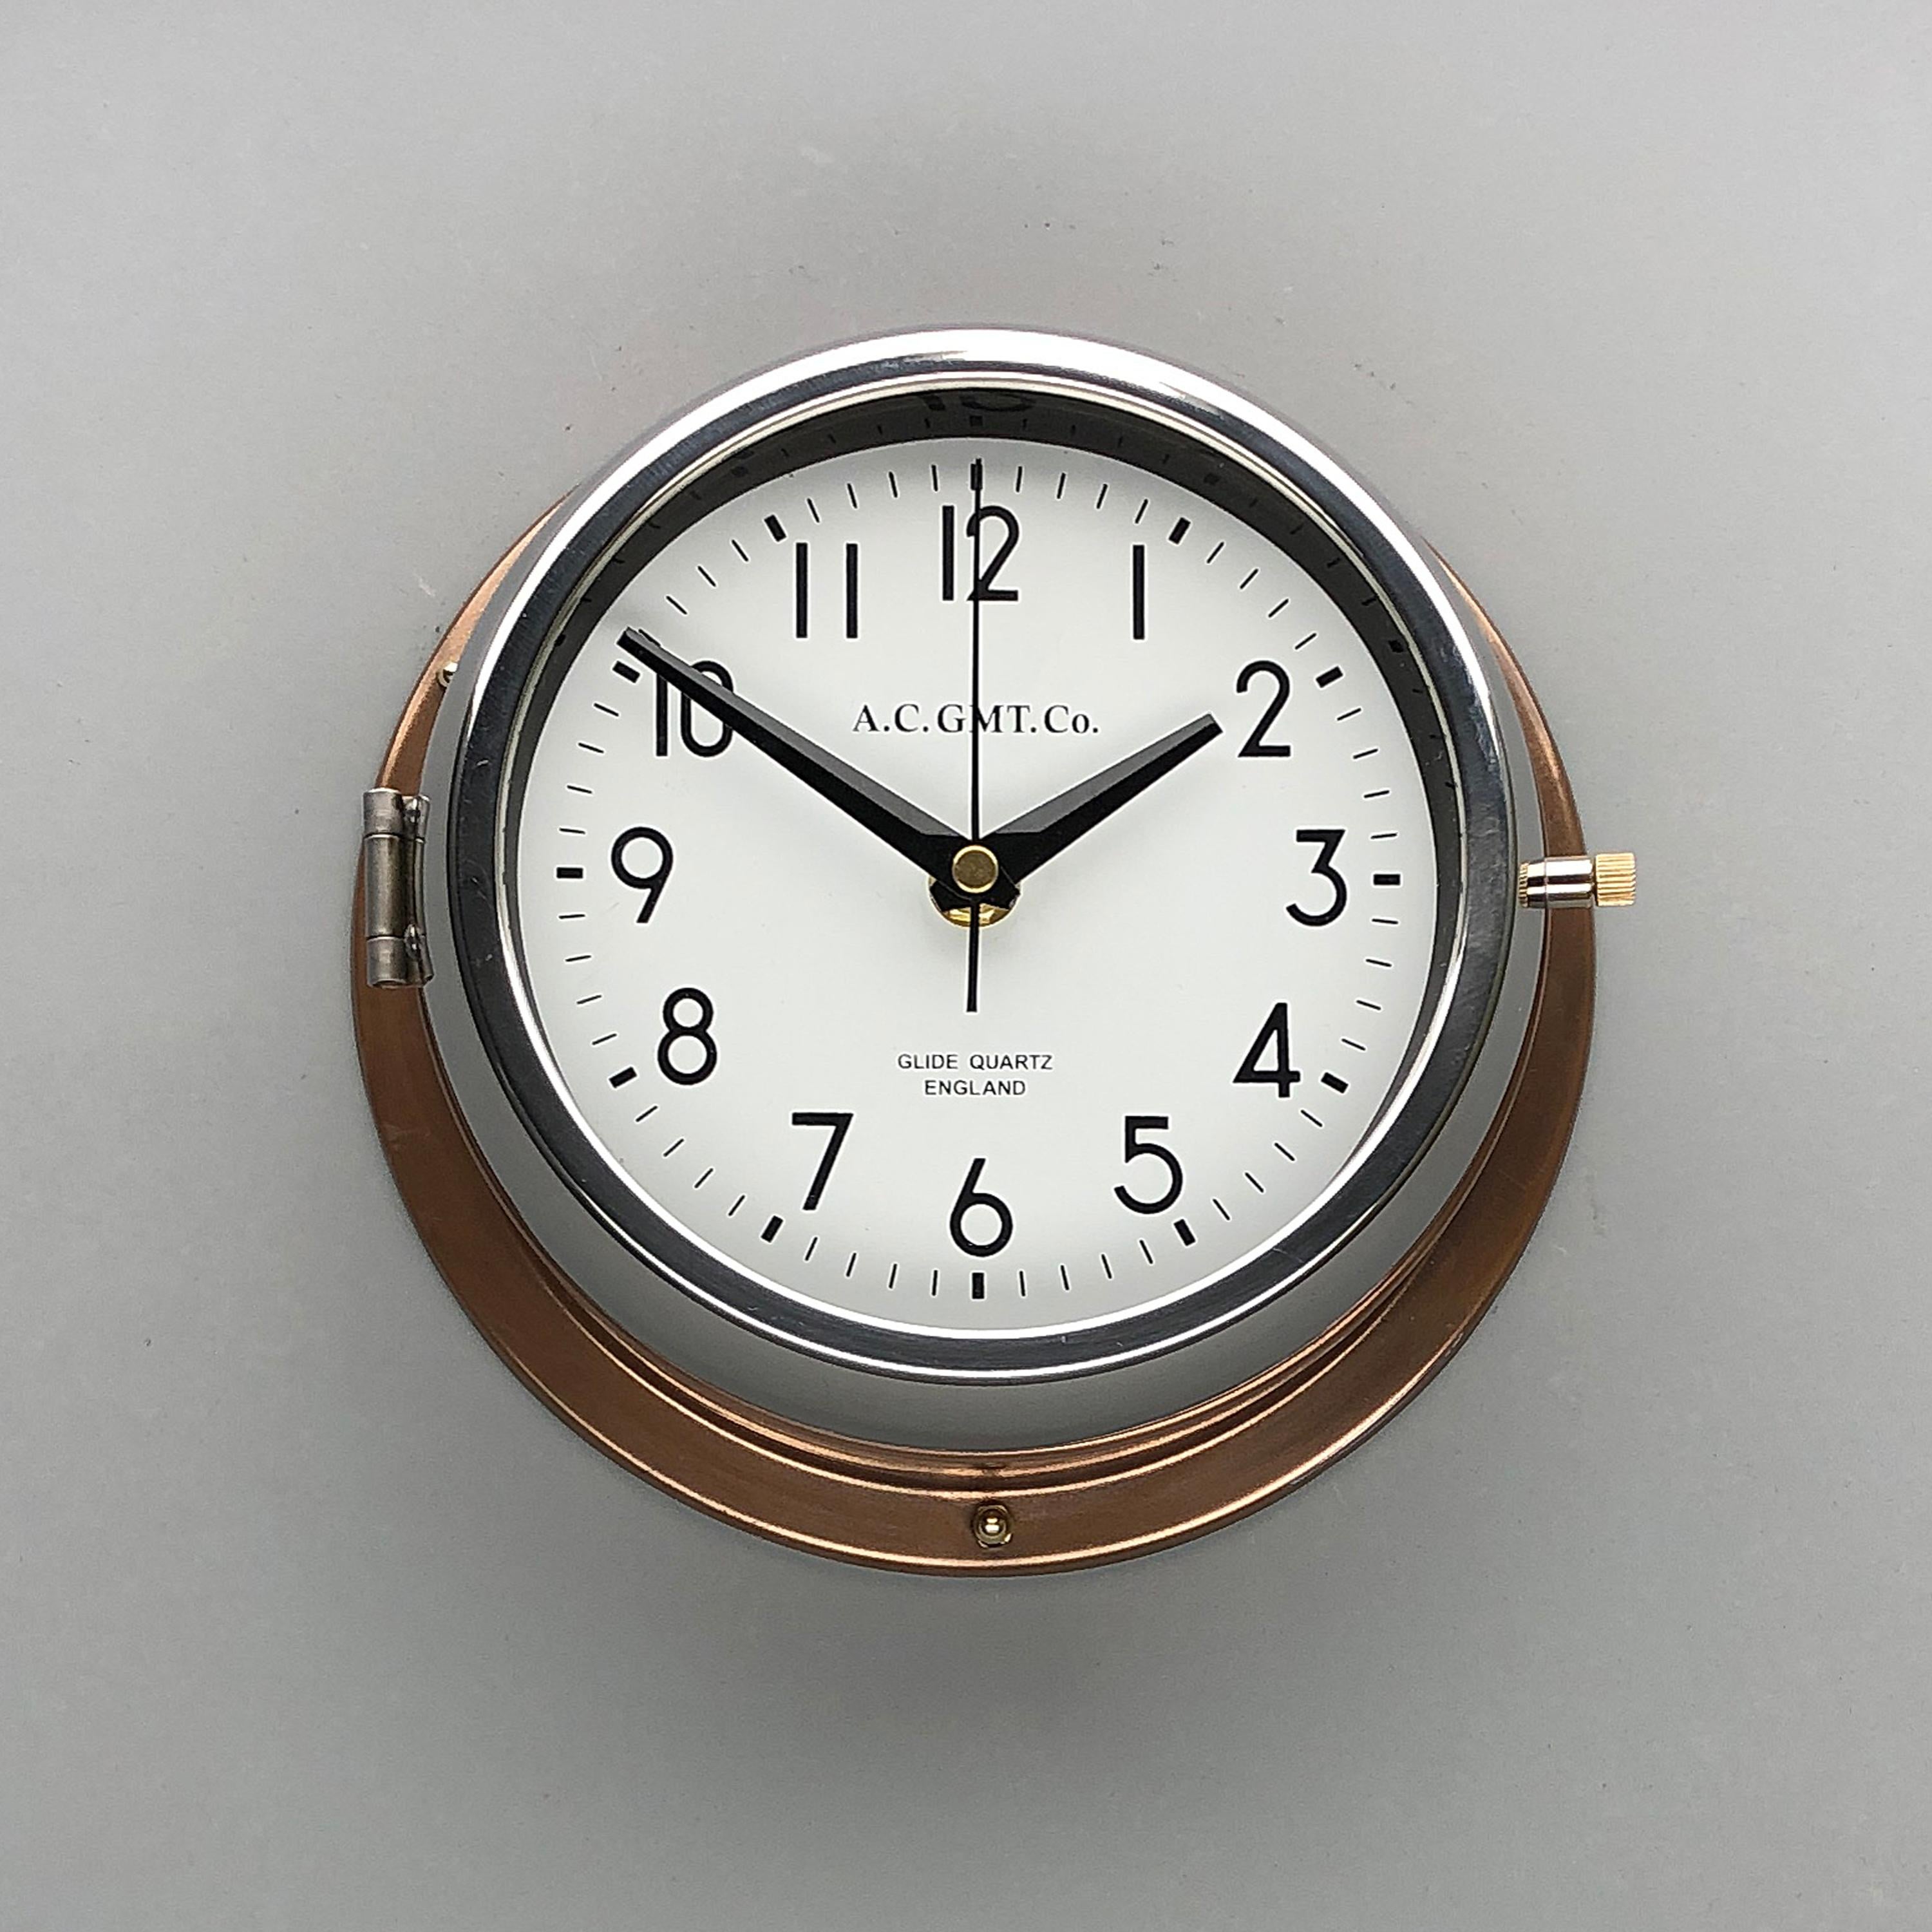 1970s British Bronze and Chrome AC GMT Co. Industrial Wall Clock White Dial 10